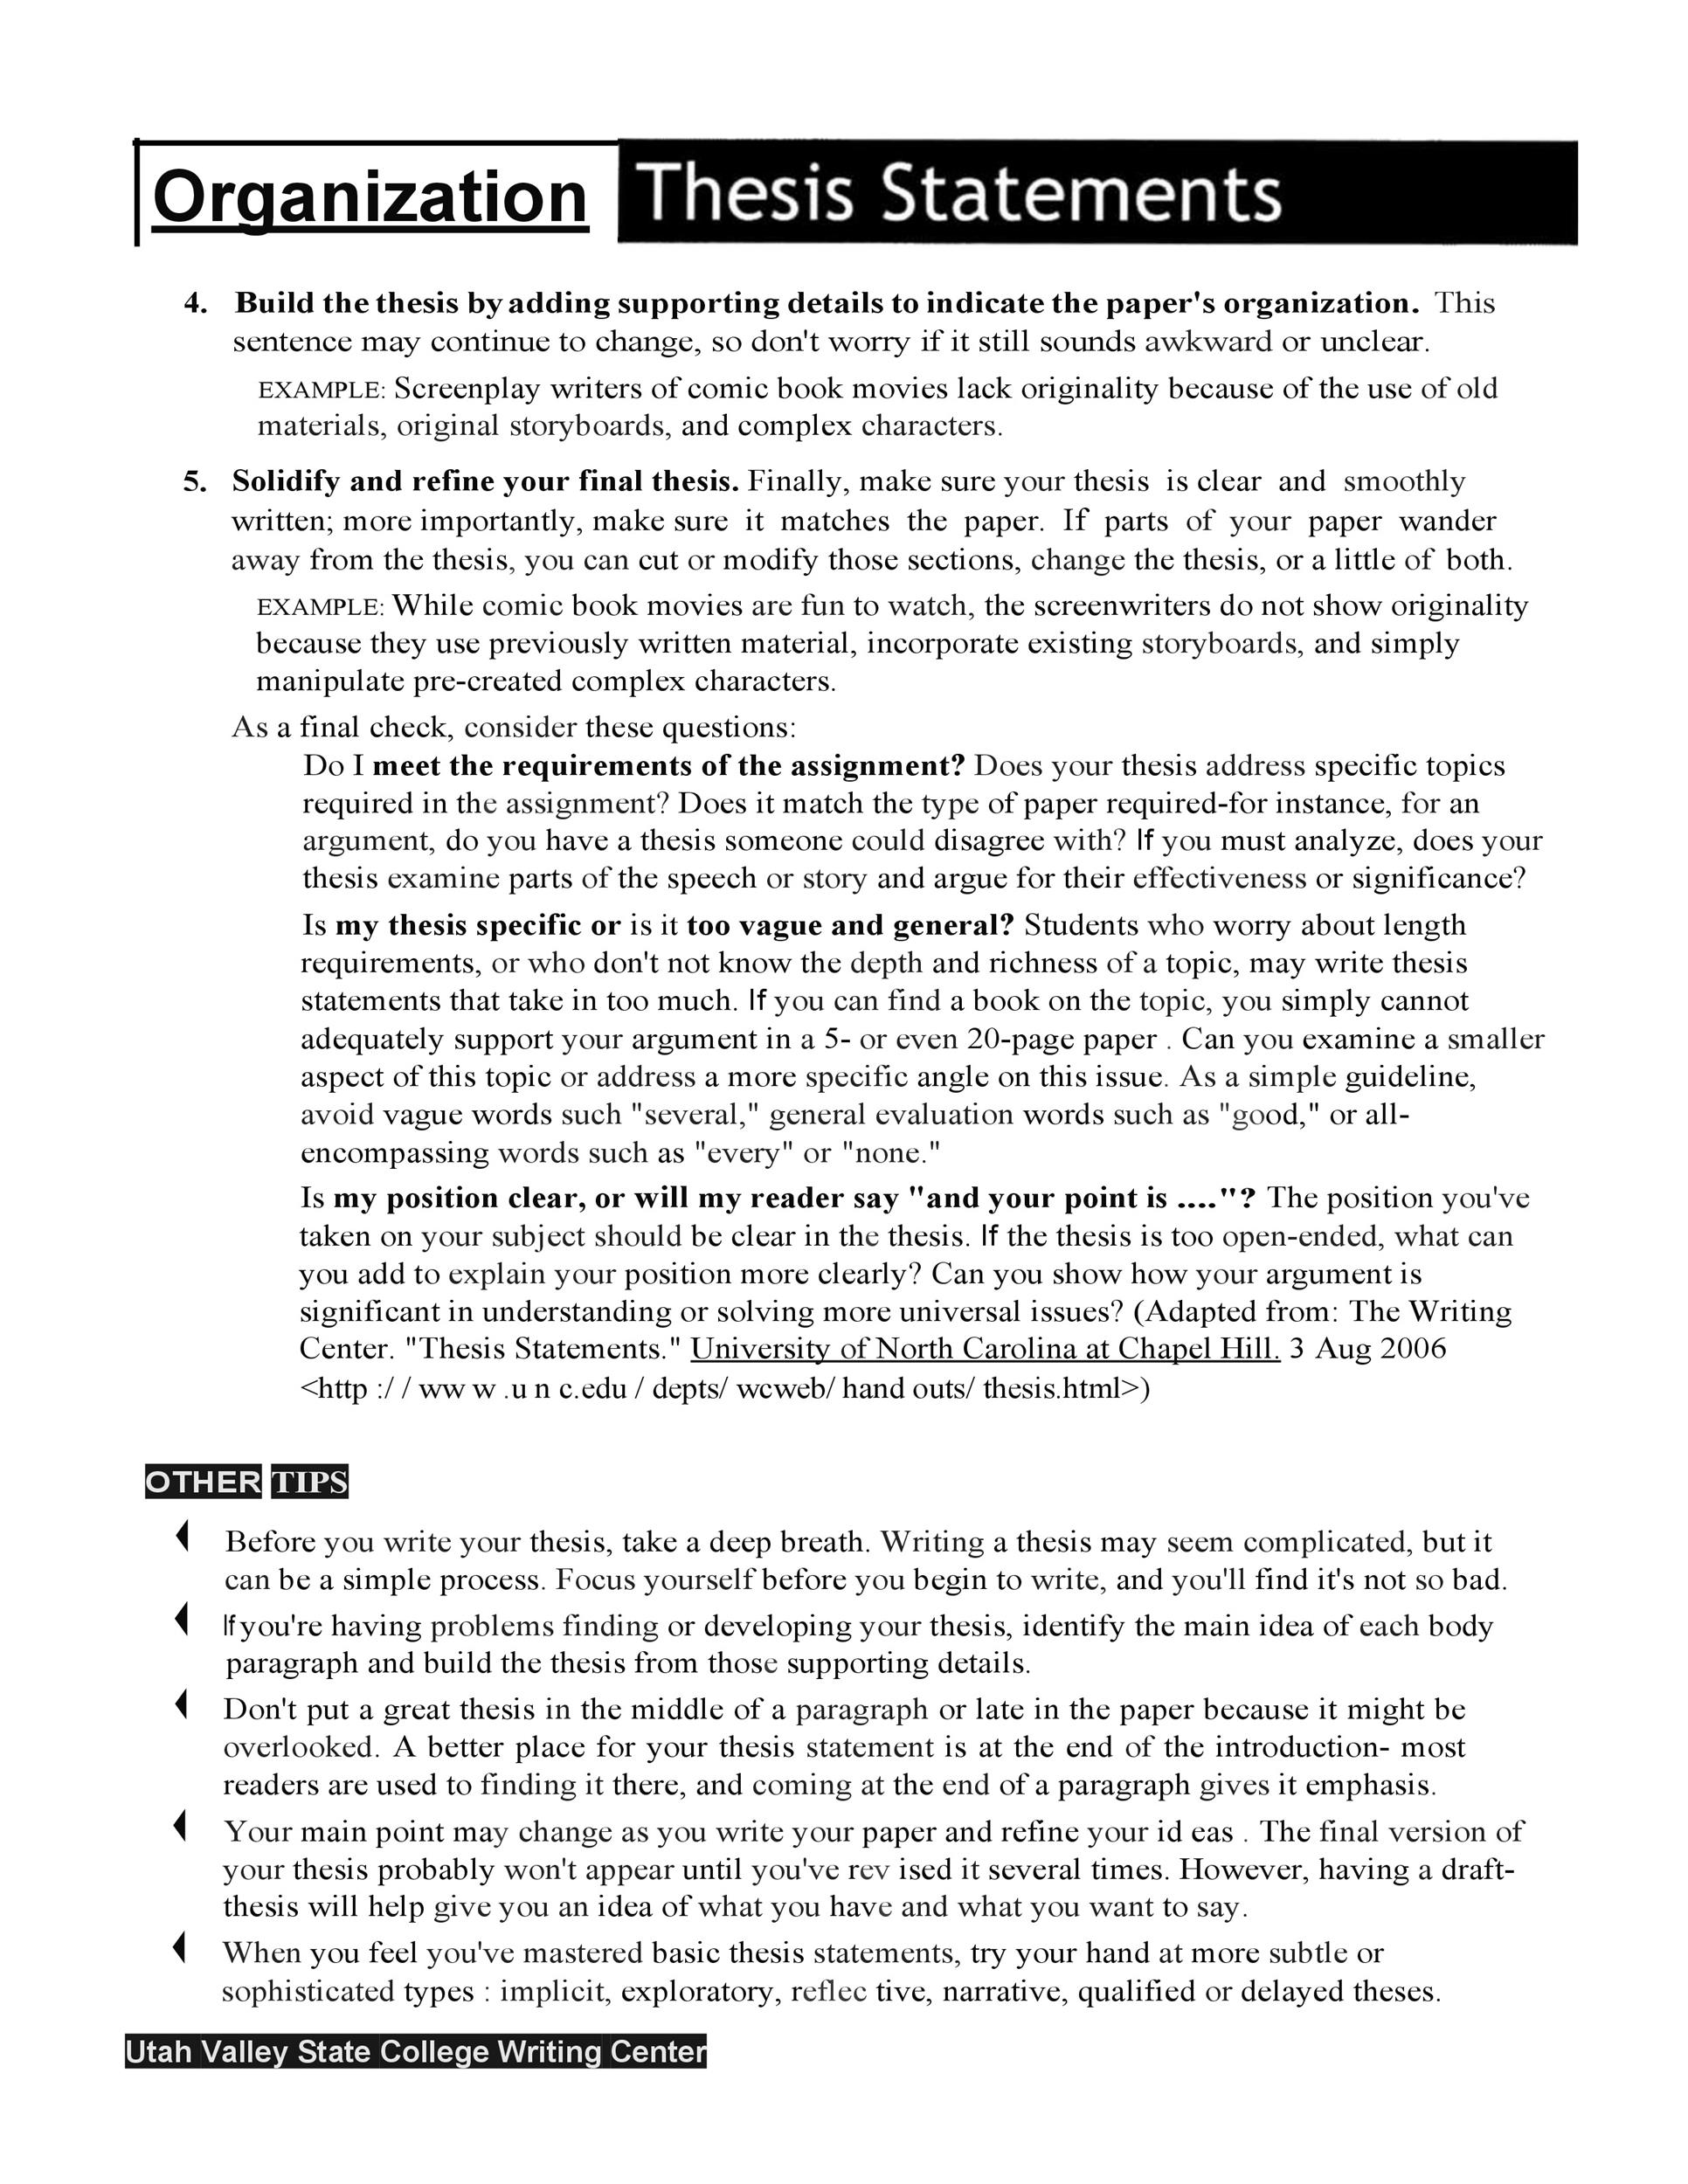 research thesis statement template